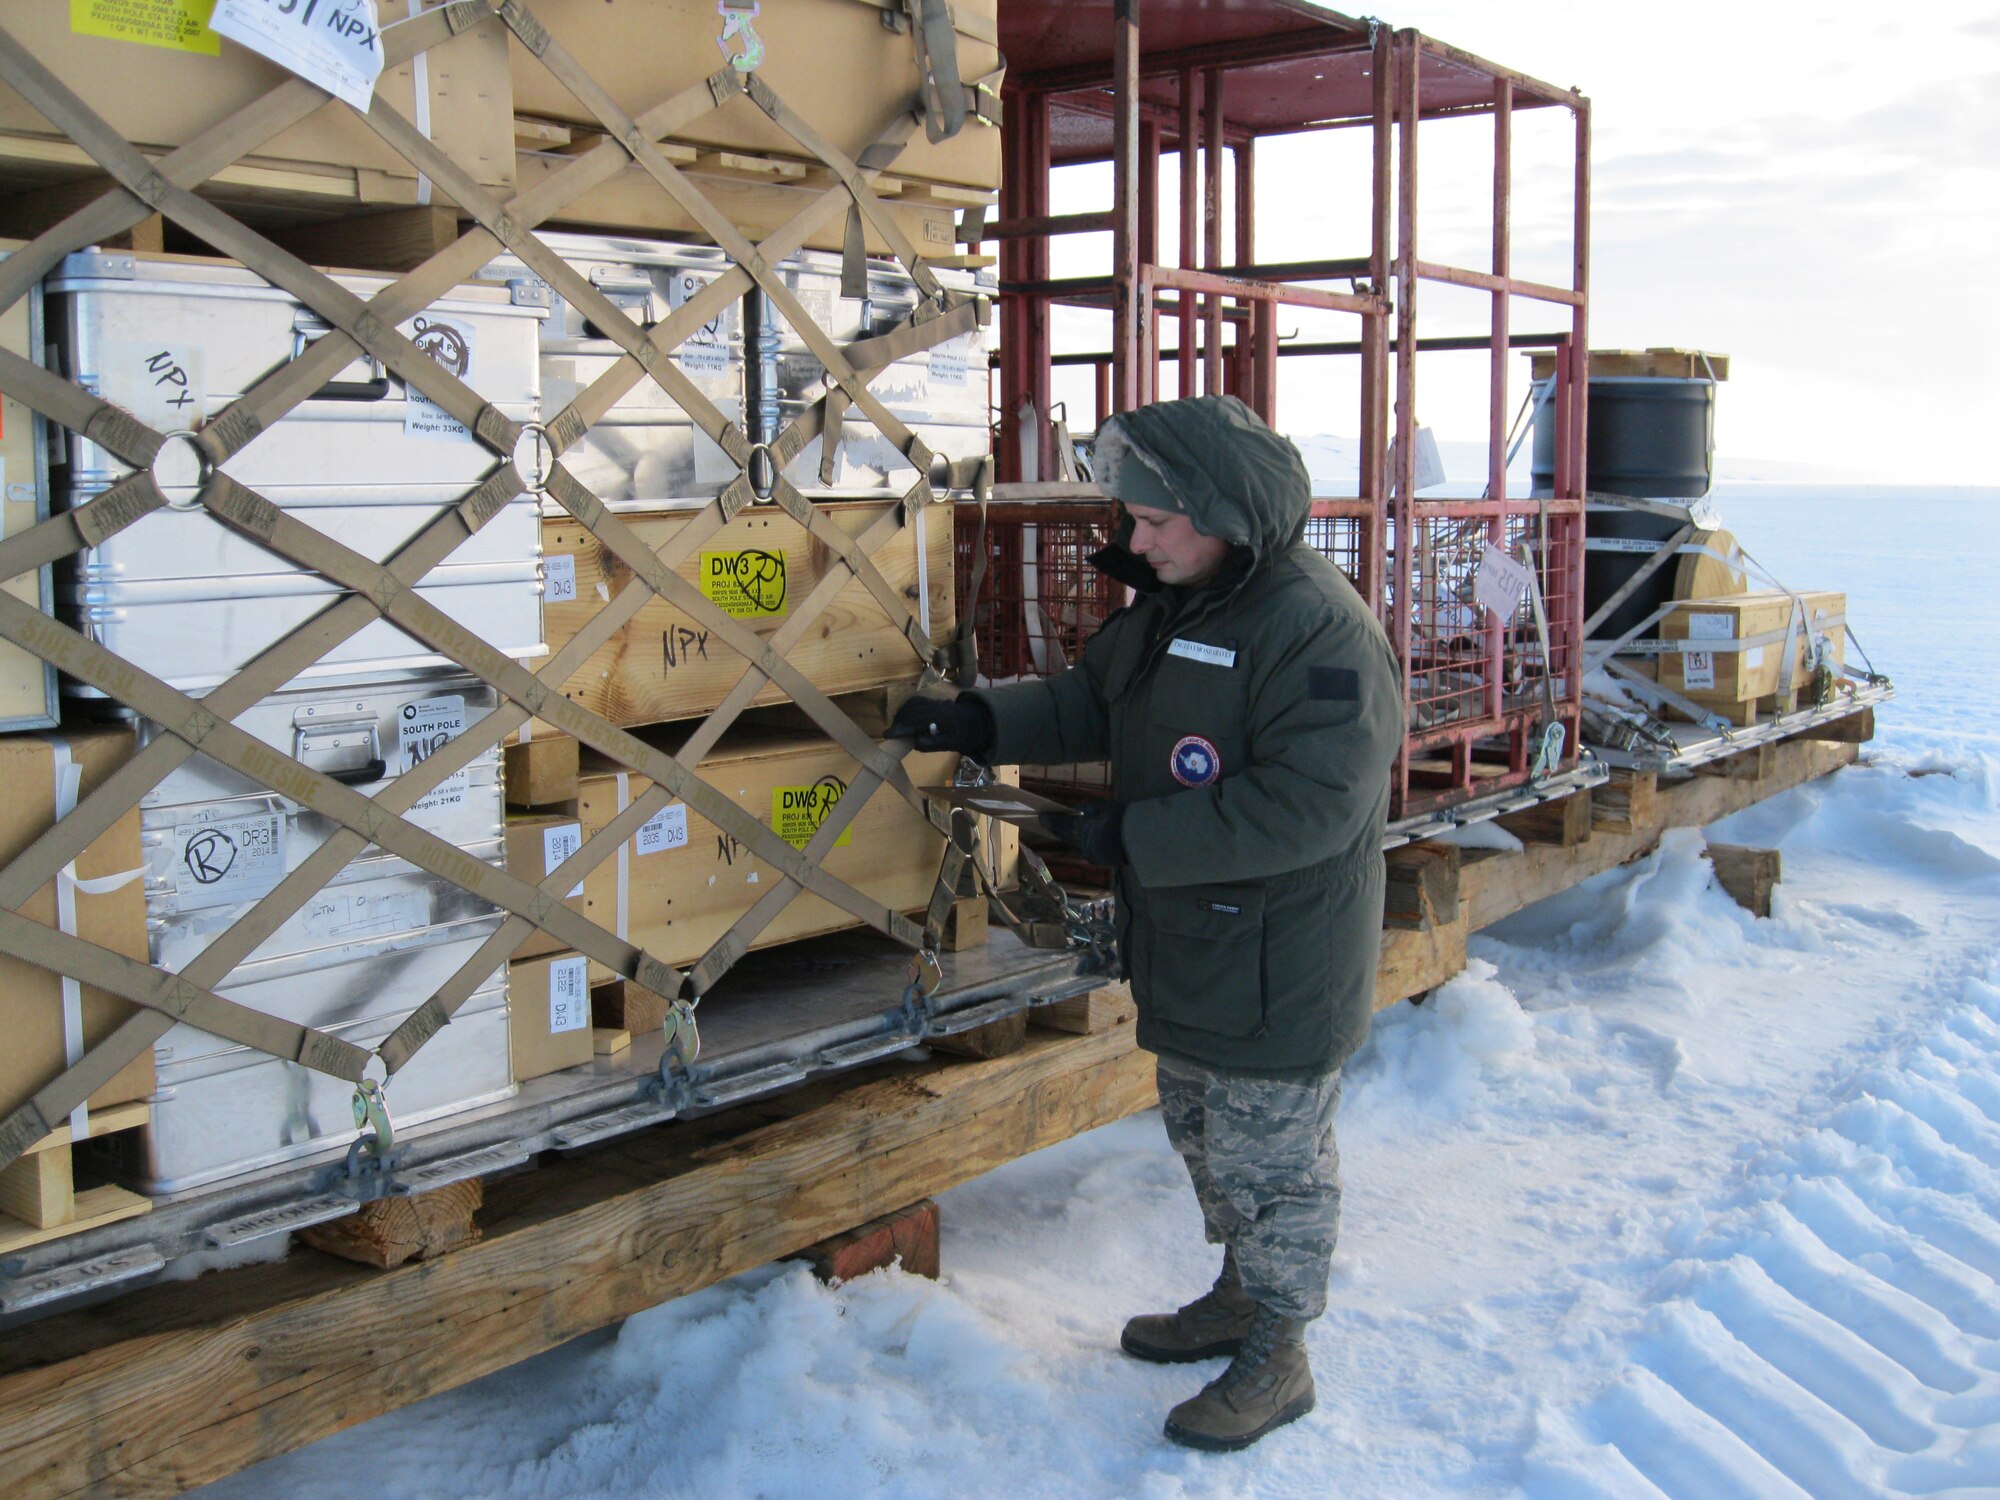 The Kentucky Air National Guard's Tech. Sgt. Ray Graves inspects outbound cargo on an ice runway Dec. 28, 2011, while deployed to McMurdo Station, Antarctica. Graves supported Operation Deep Freeze as NCOIC of joint inspection and rigging for the third rotation of the 2011-12 Deep Freeze season. (Courtesy Photo)